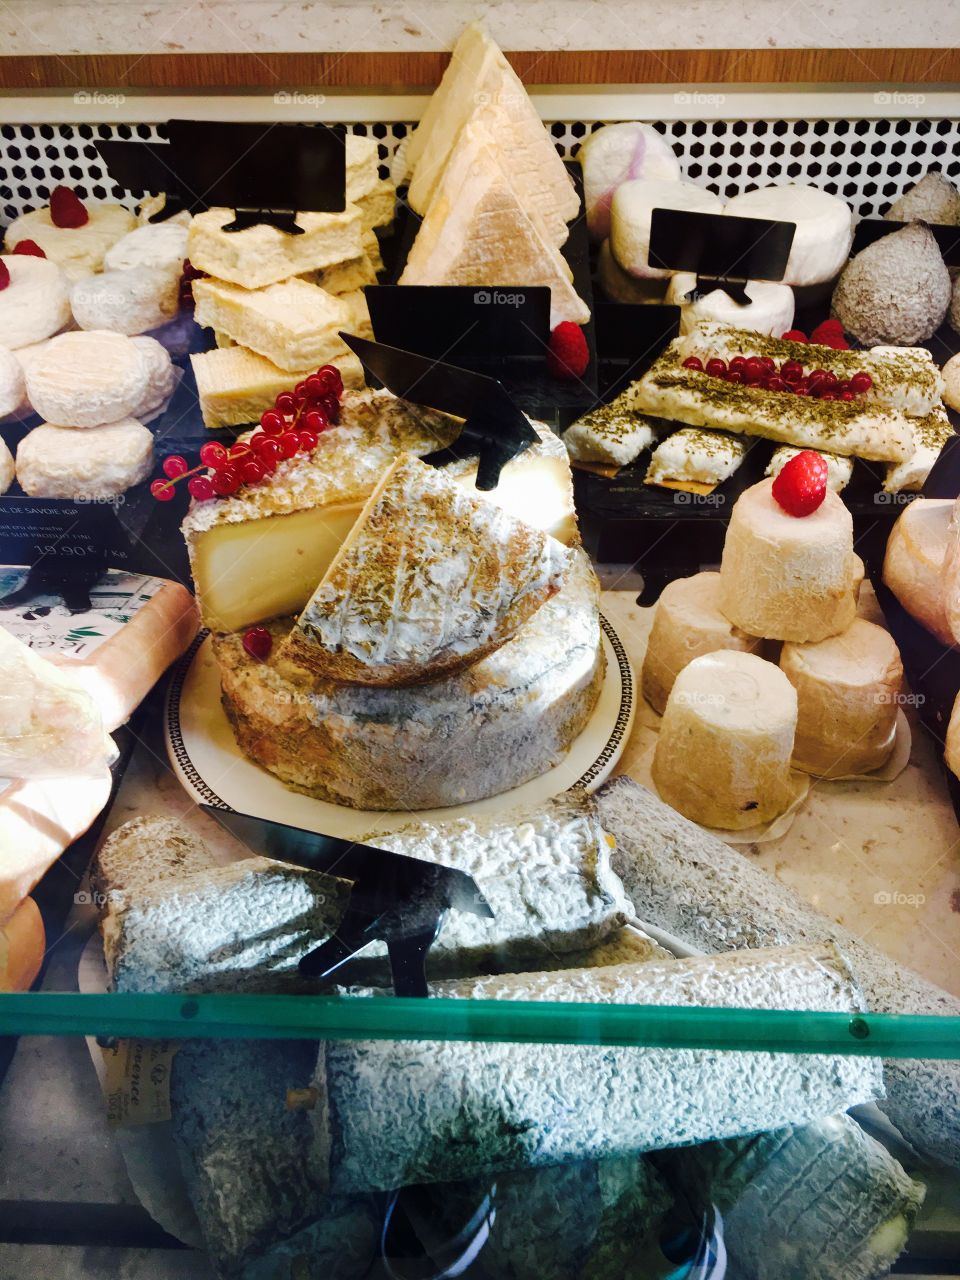 Fromage Shop in Paris, France 